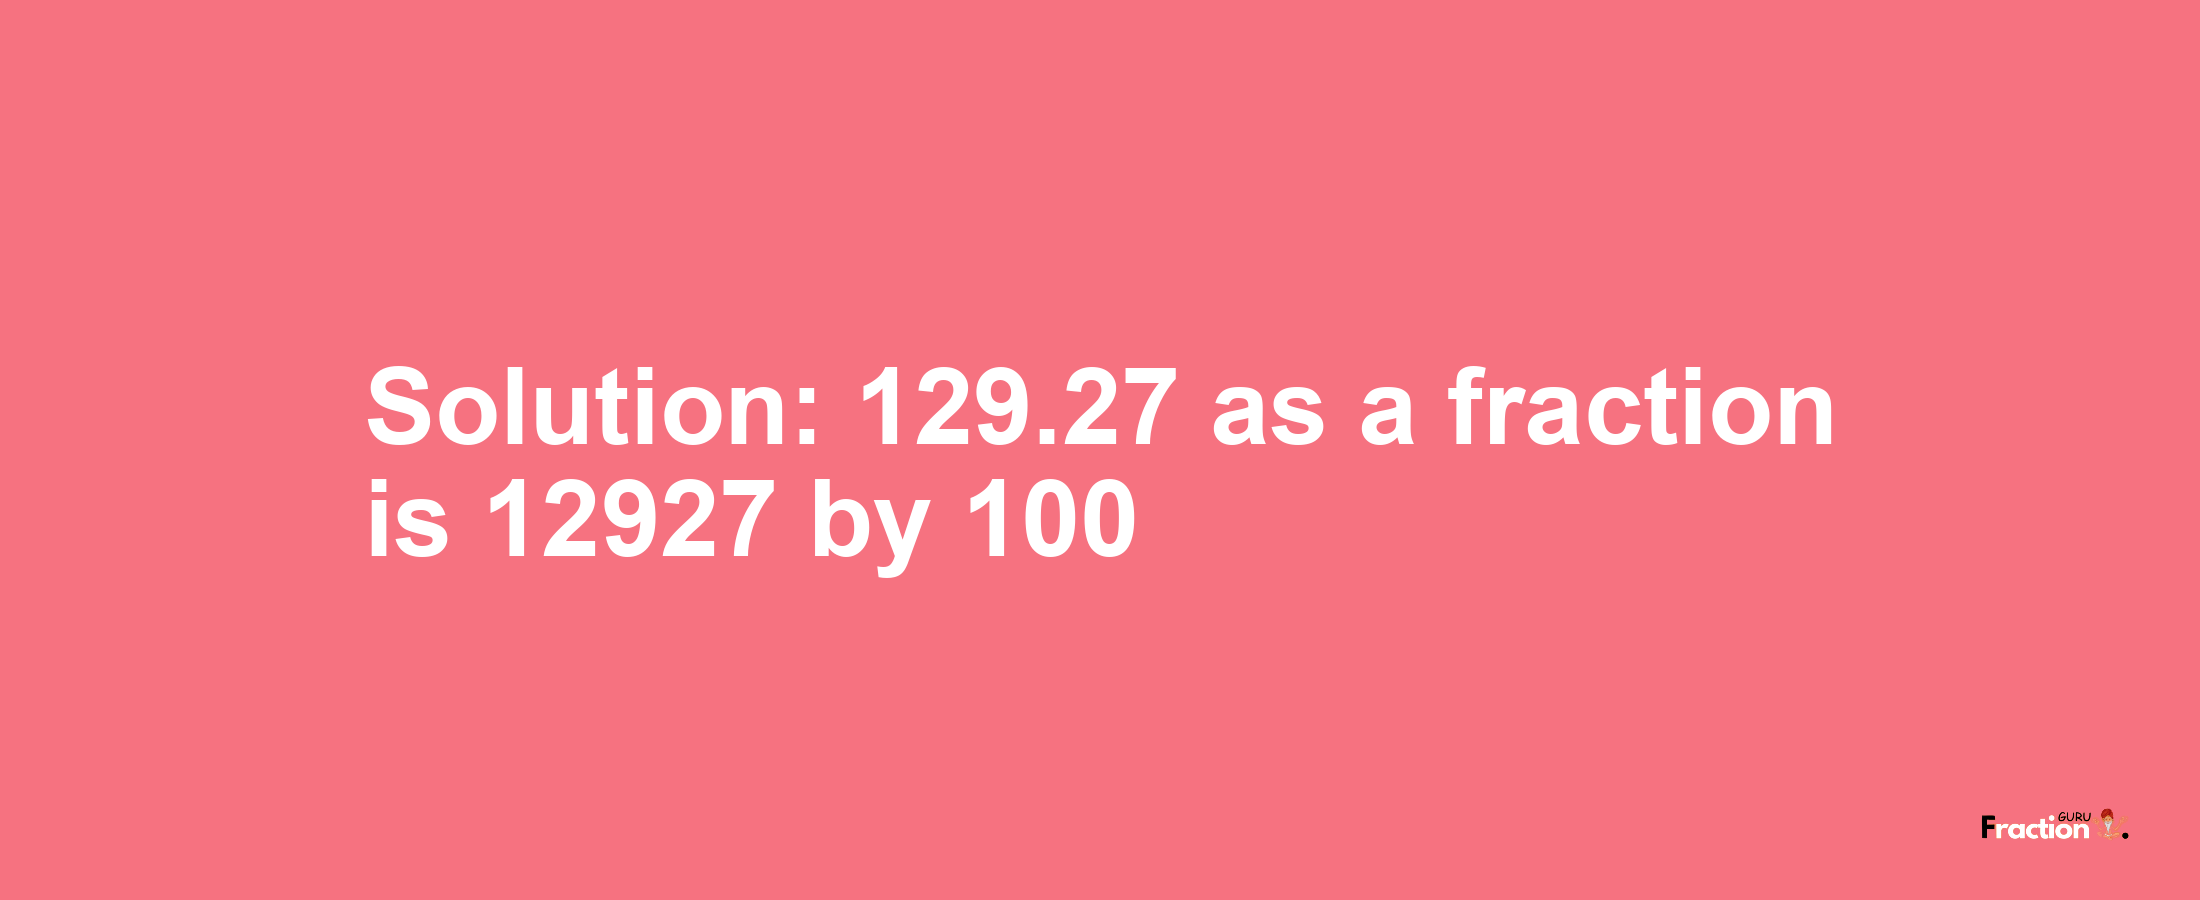 Solution:129.27 as a fraction is 12927/100